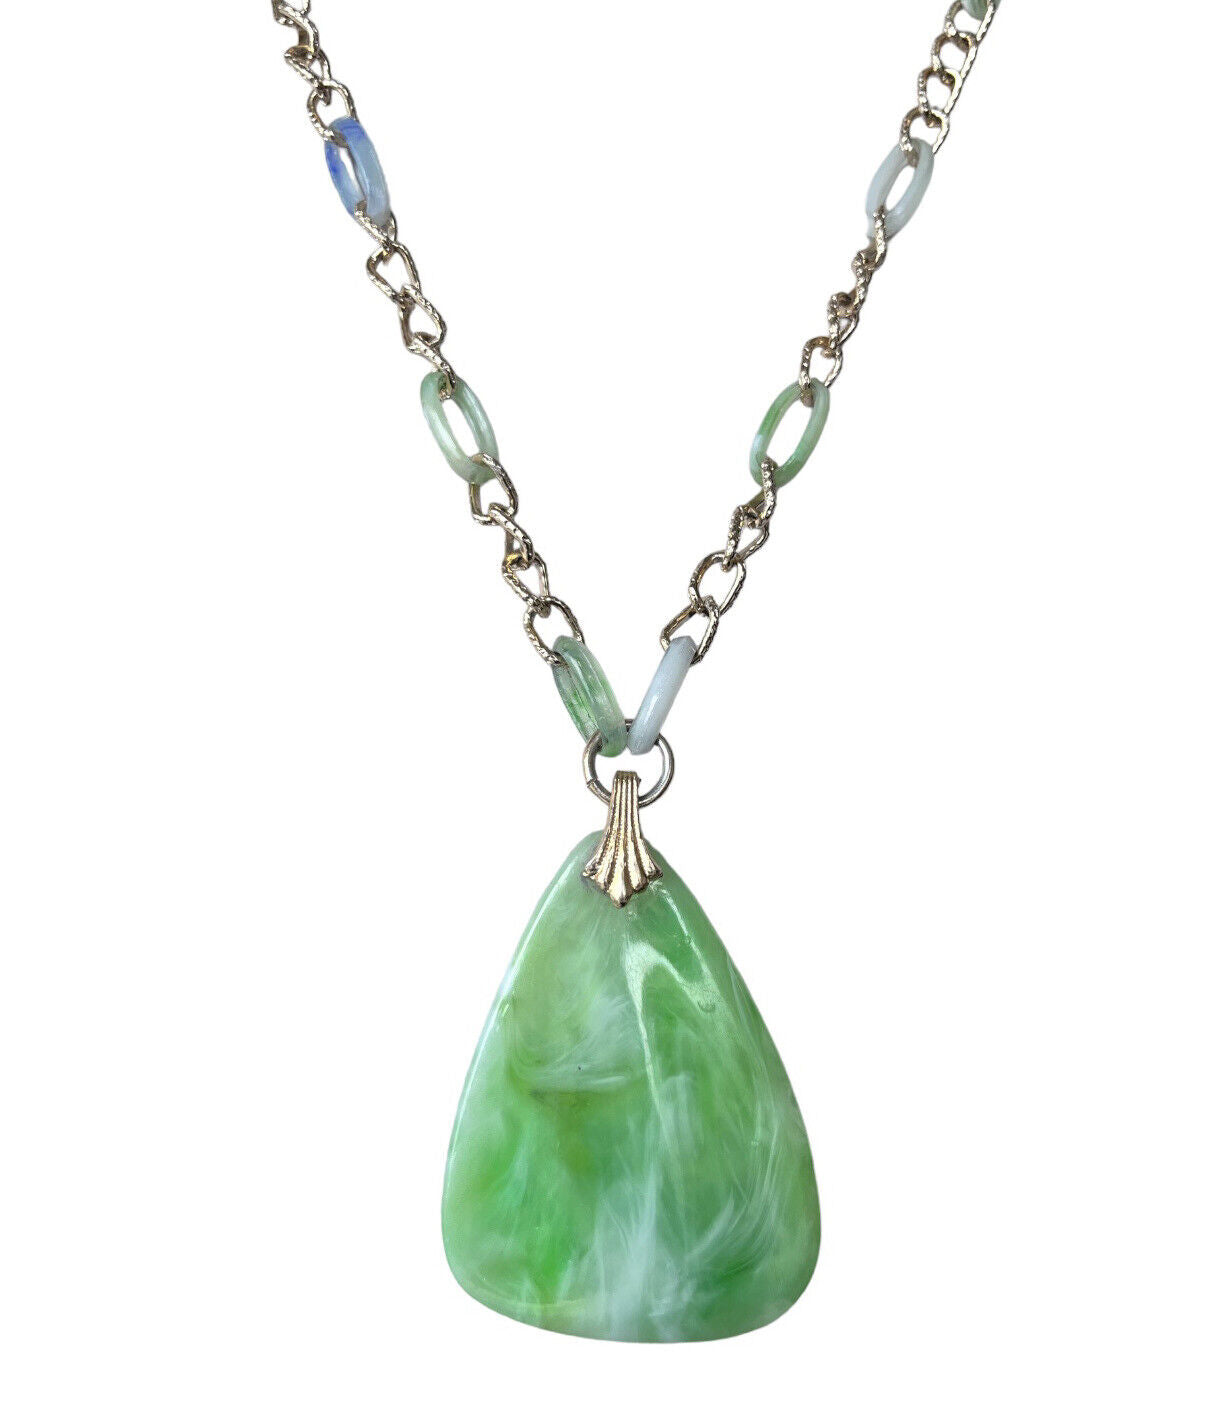 Vintage Green Blue White Marbled Acrylic Gold Tone Link Necklace Long Length